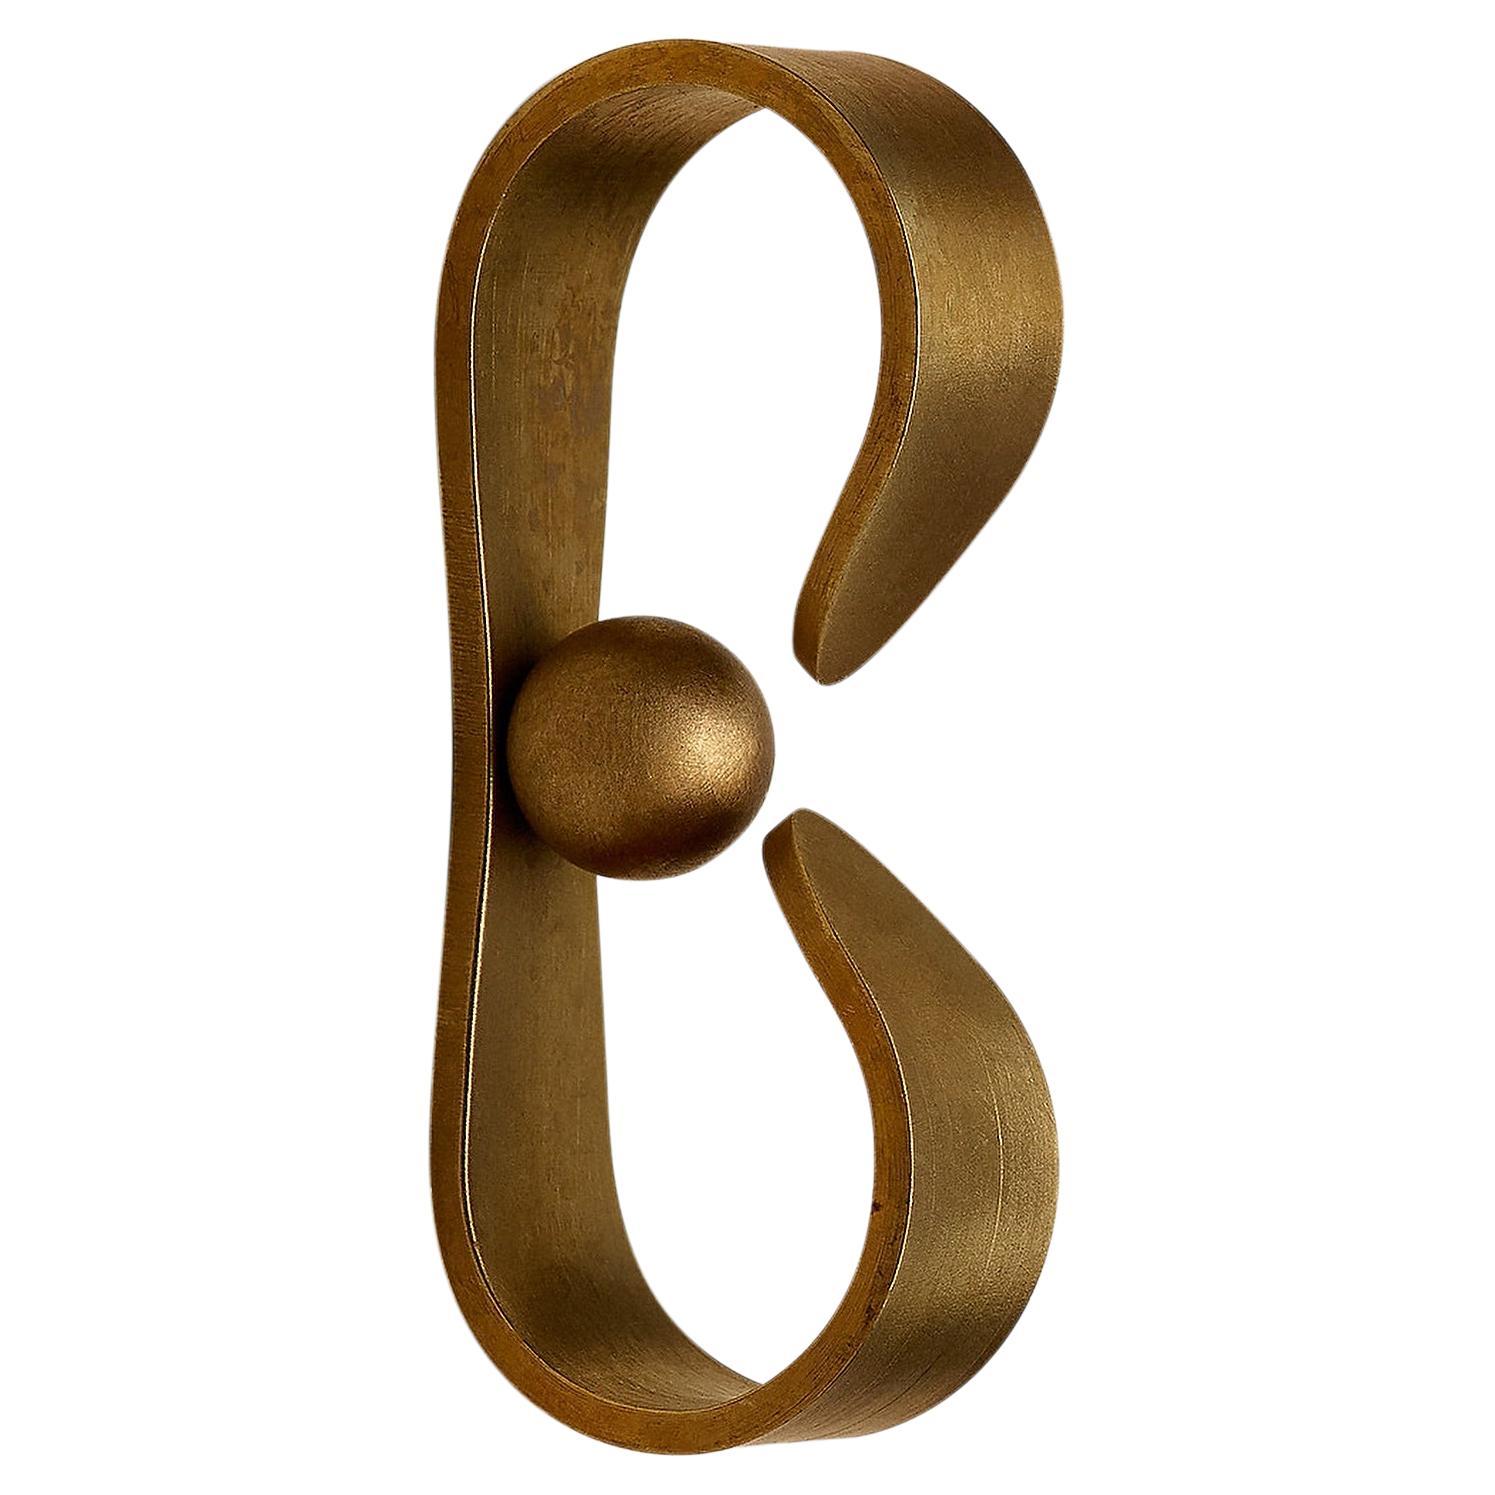 Contemporary Door Handle / Knob 'Prim' by Spaces Within, Amber Brass For Sale